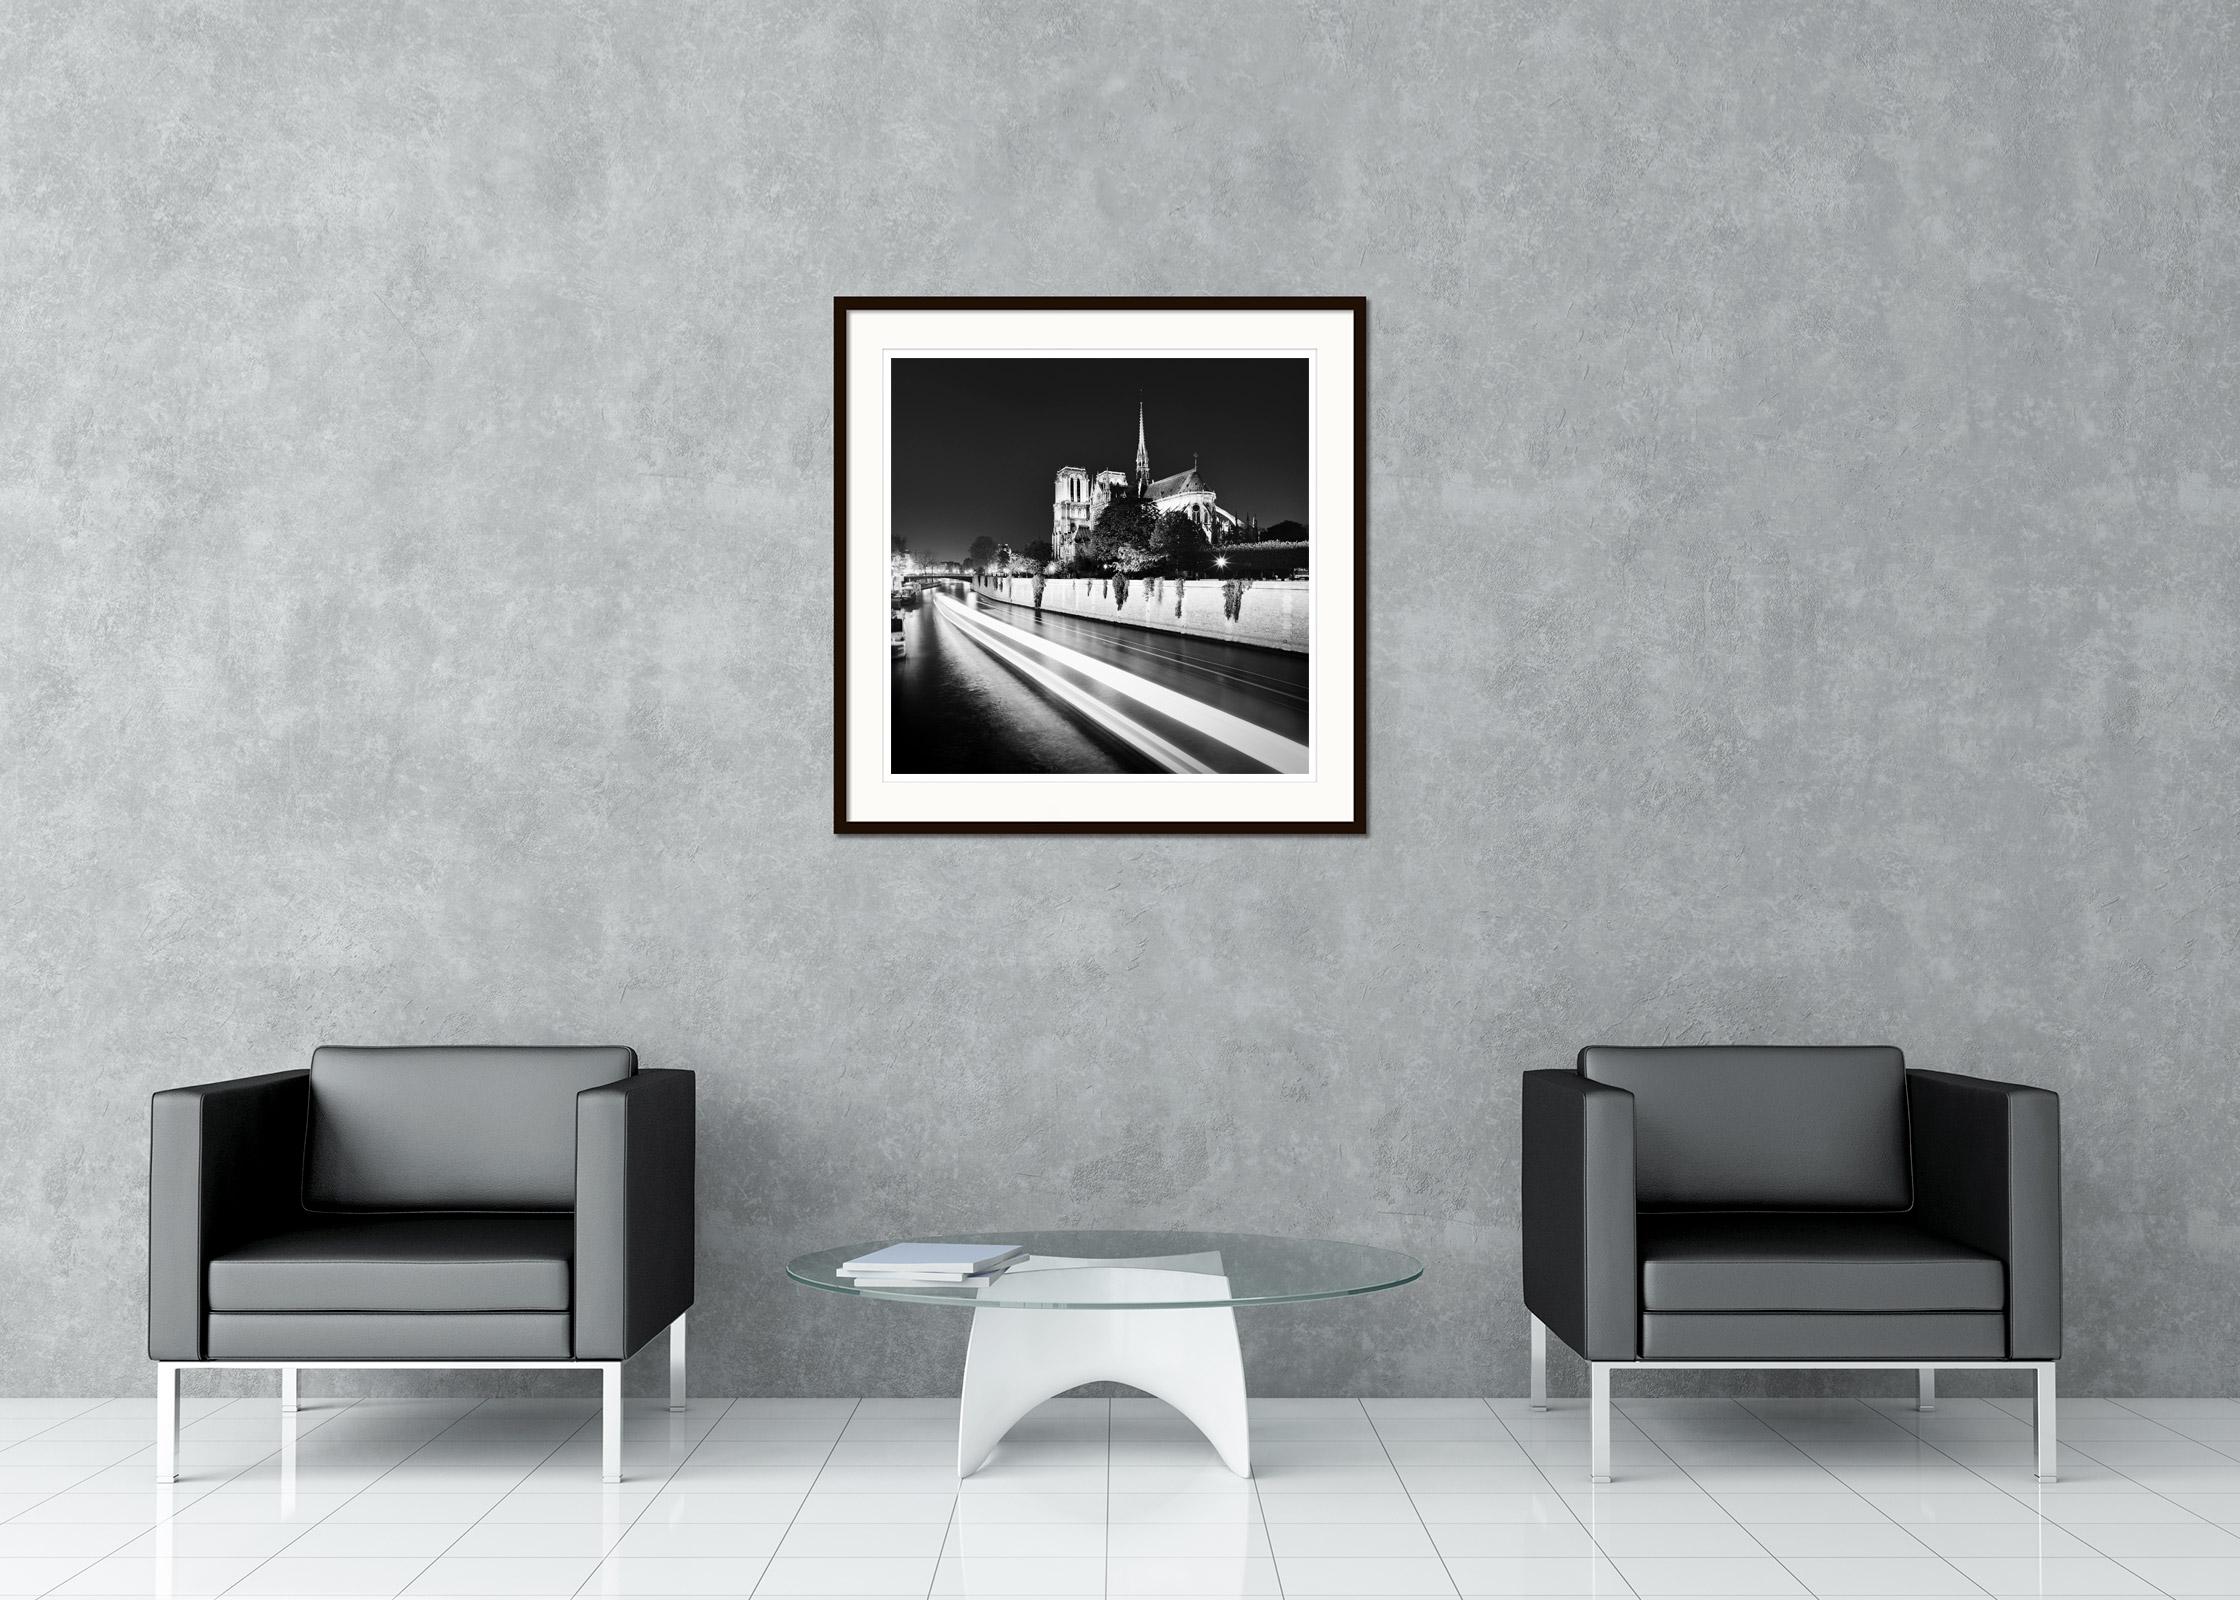 Black and White Fine Art long exposure cityscape photography. Archival pigment ink print, edition of 9. Signed, titled, dated and numbered by artist. Certificate of authenticity included. Printed with 4cm white border. 
International award winner